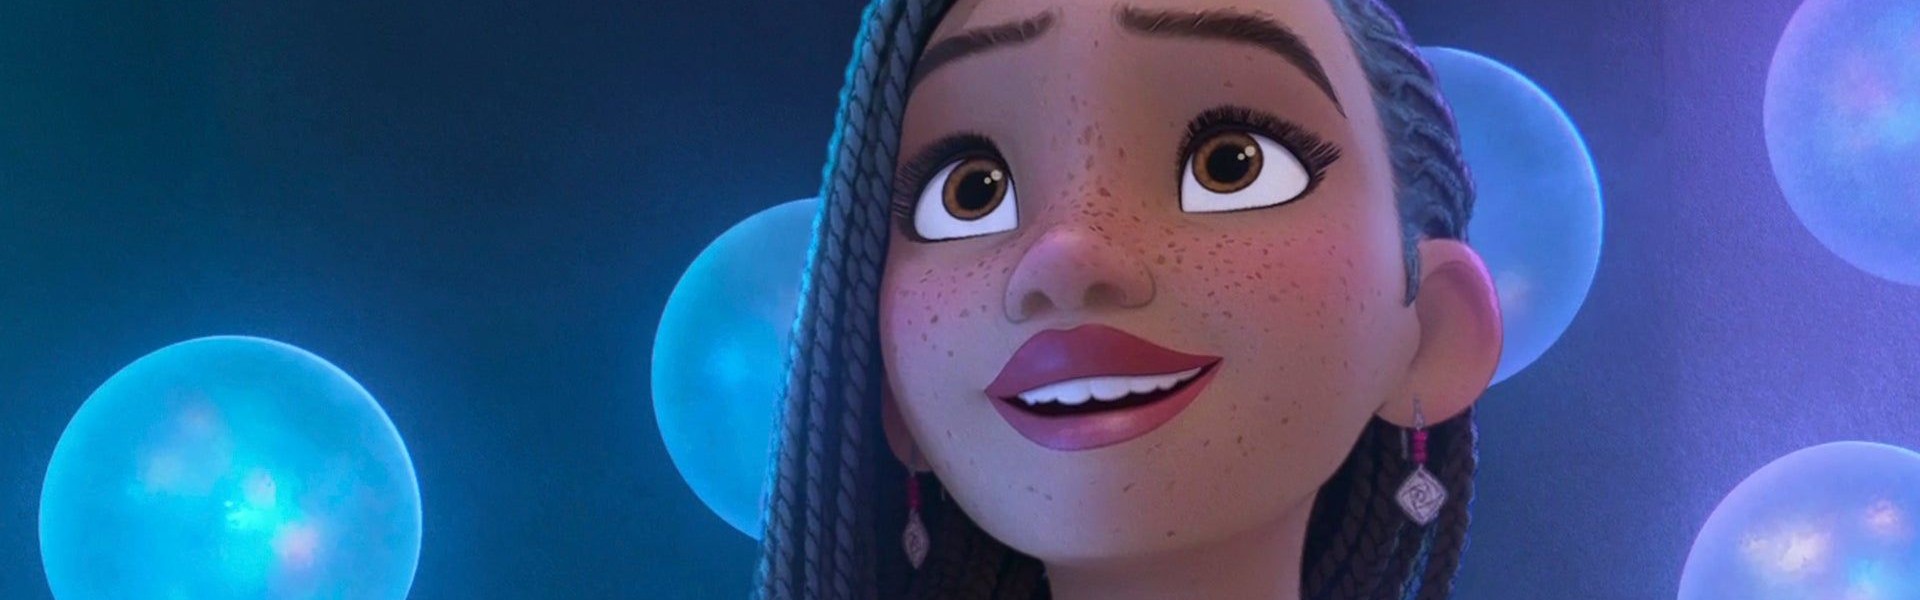 Box office flop, Disney+ hit. Strong start for “Wish” animation